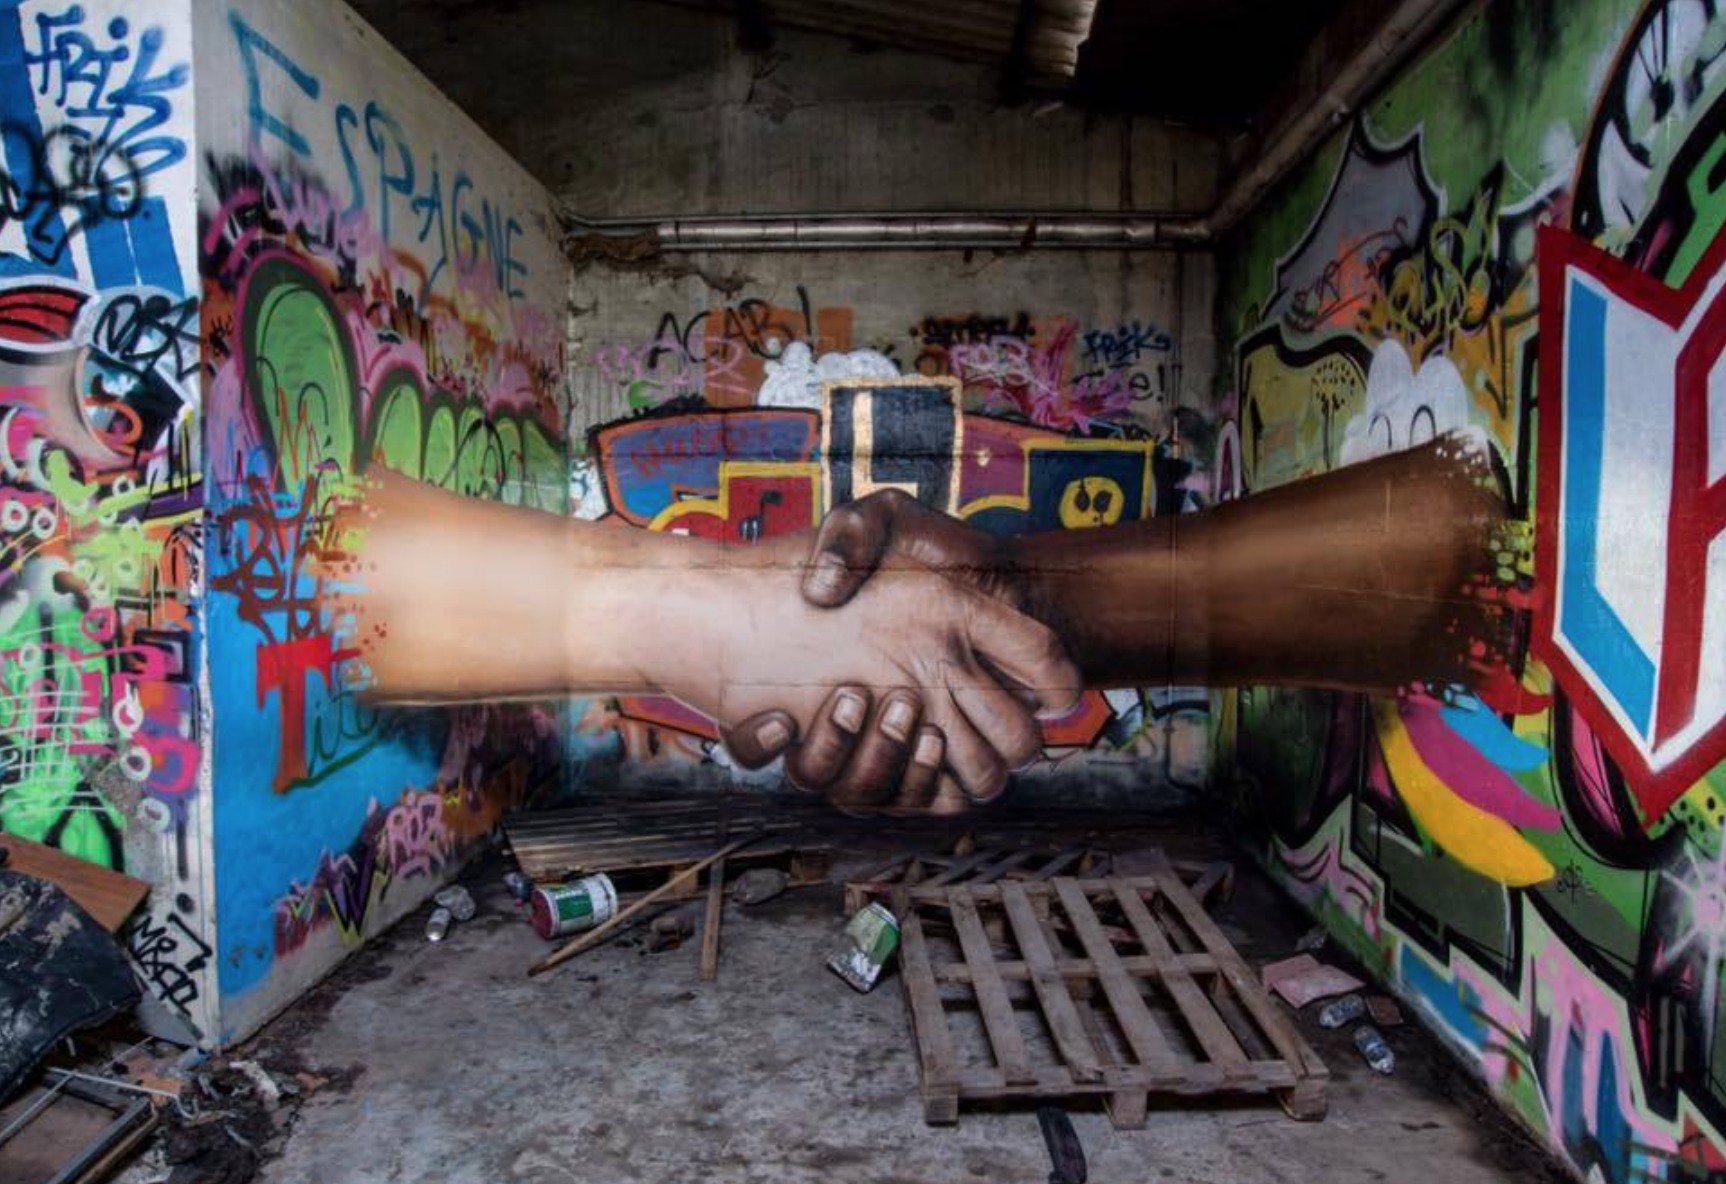 A mural of a black hand and white hand holding hands